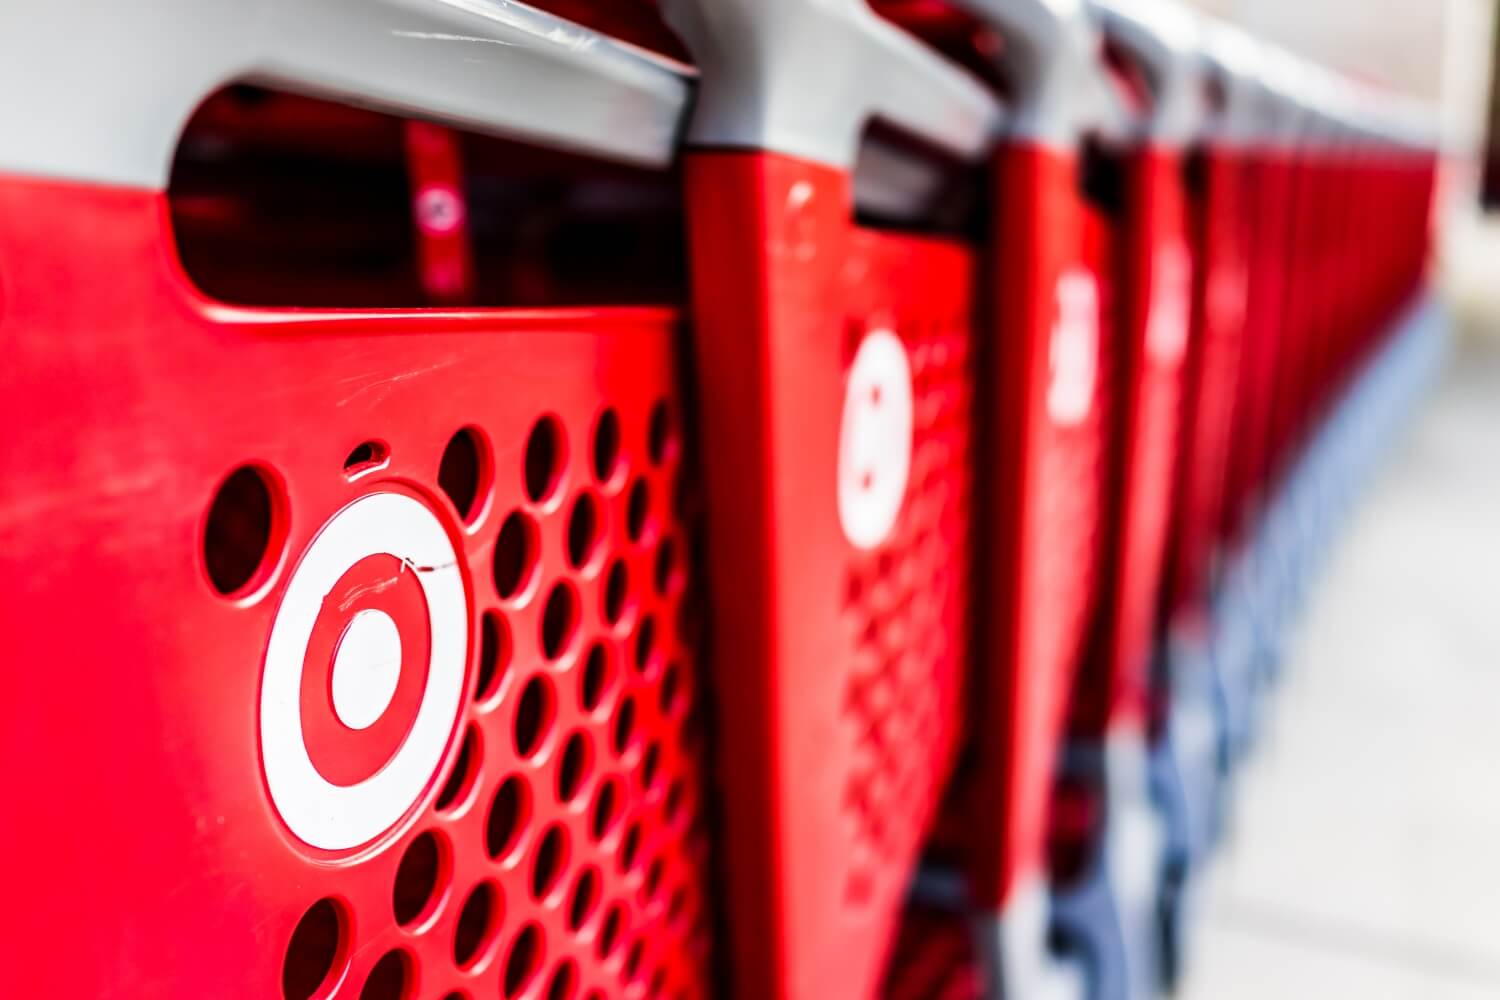 Target is buying tech and assets from same-day delivery company Deliv